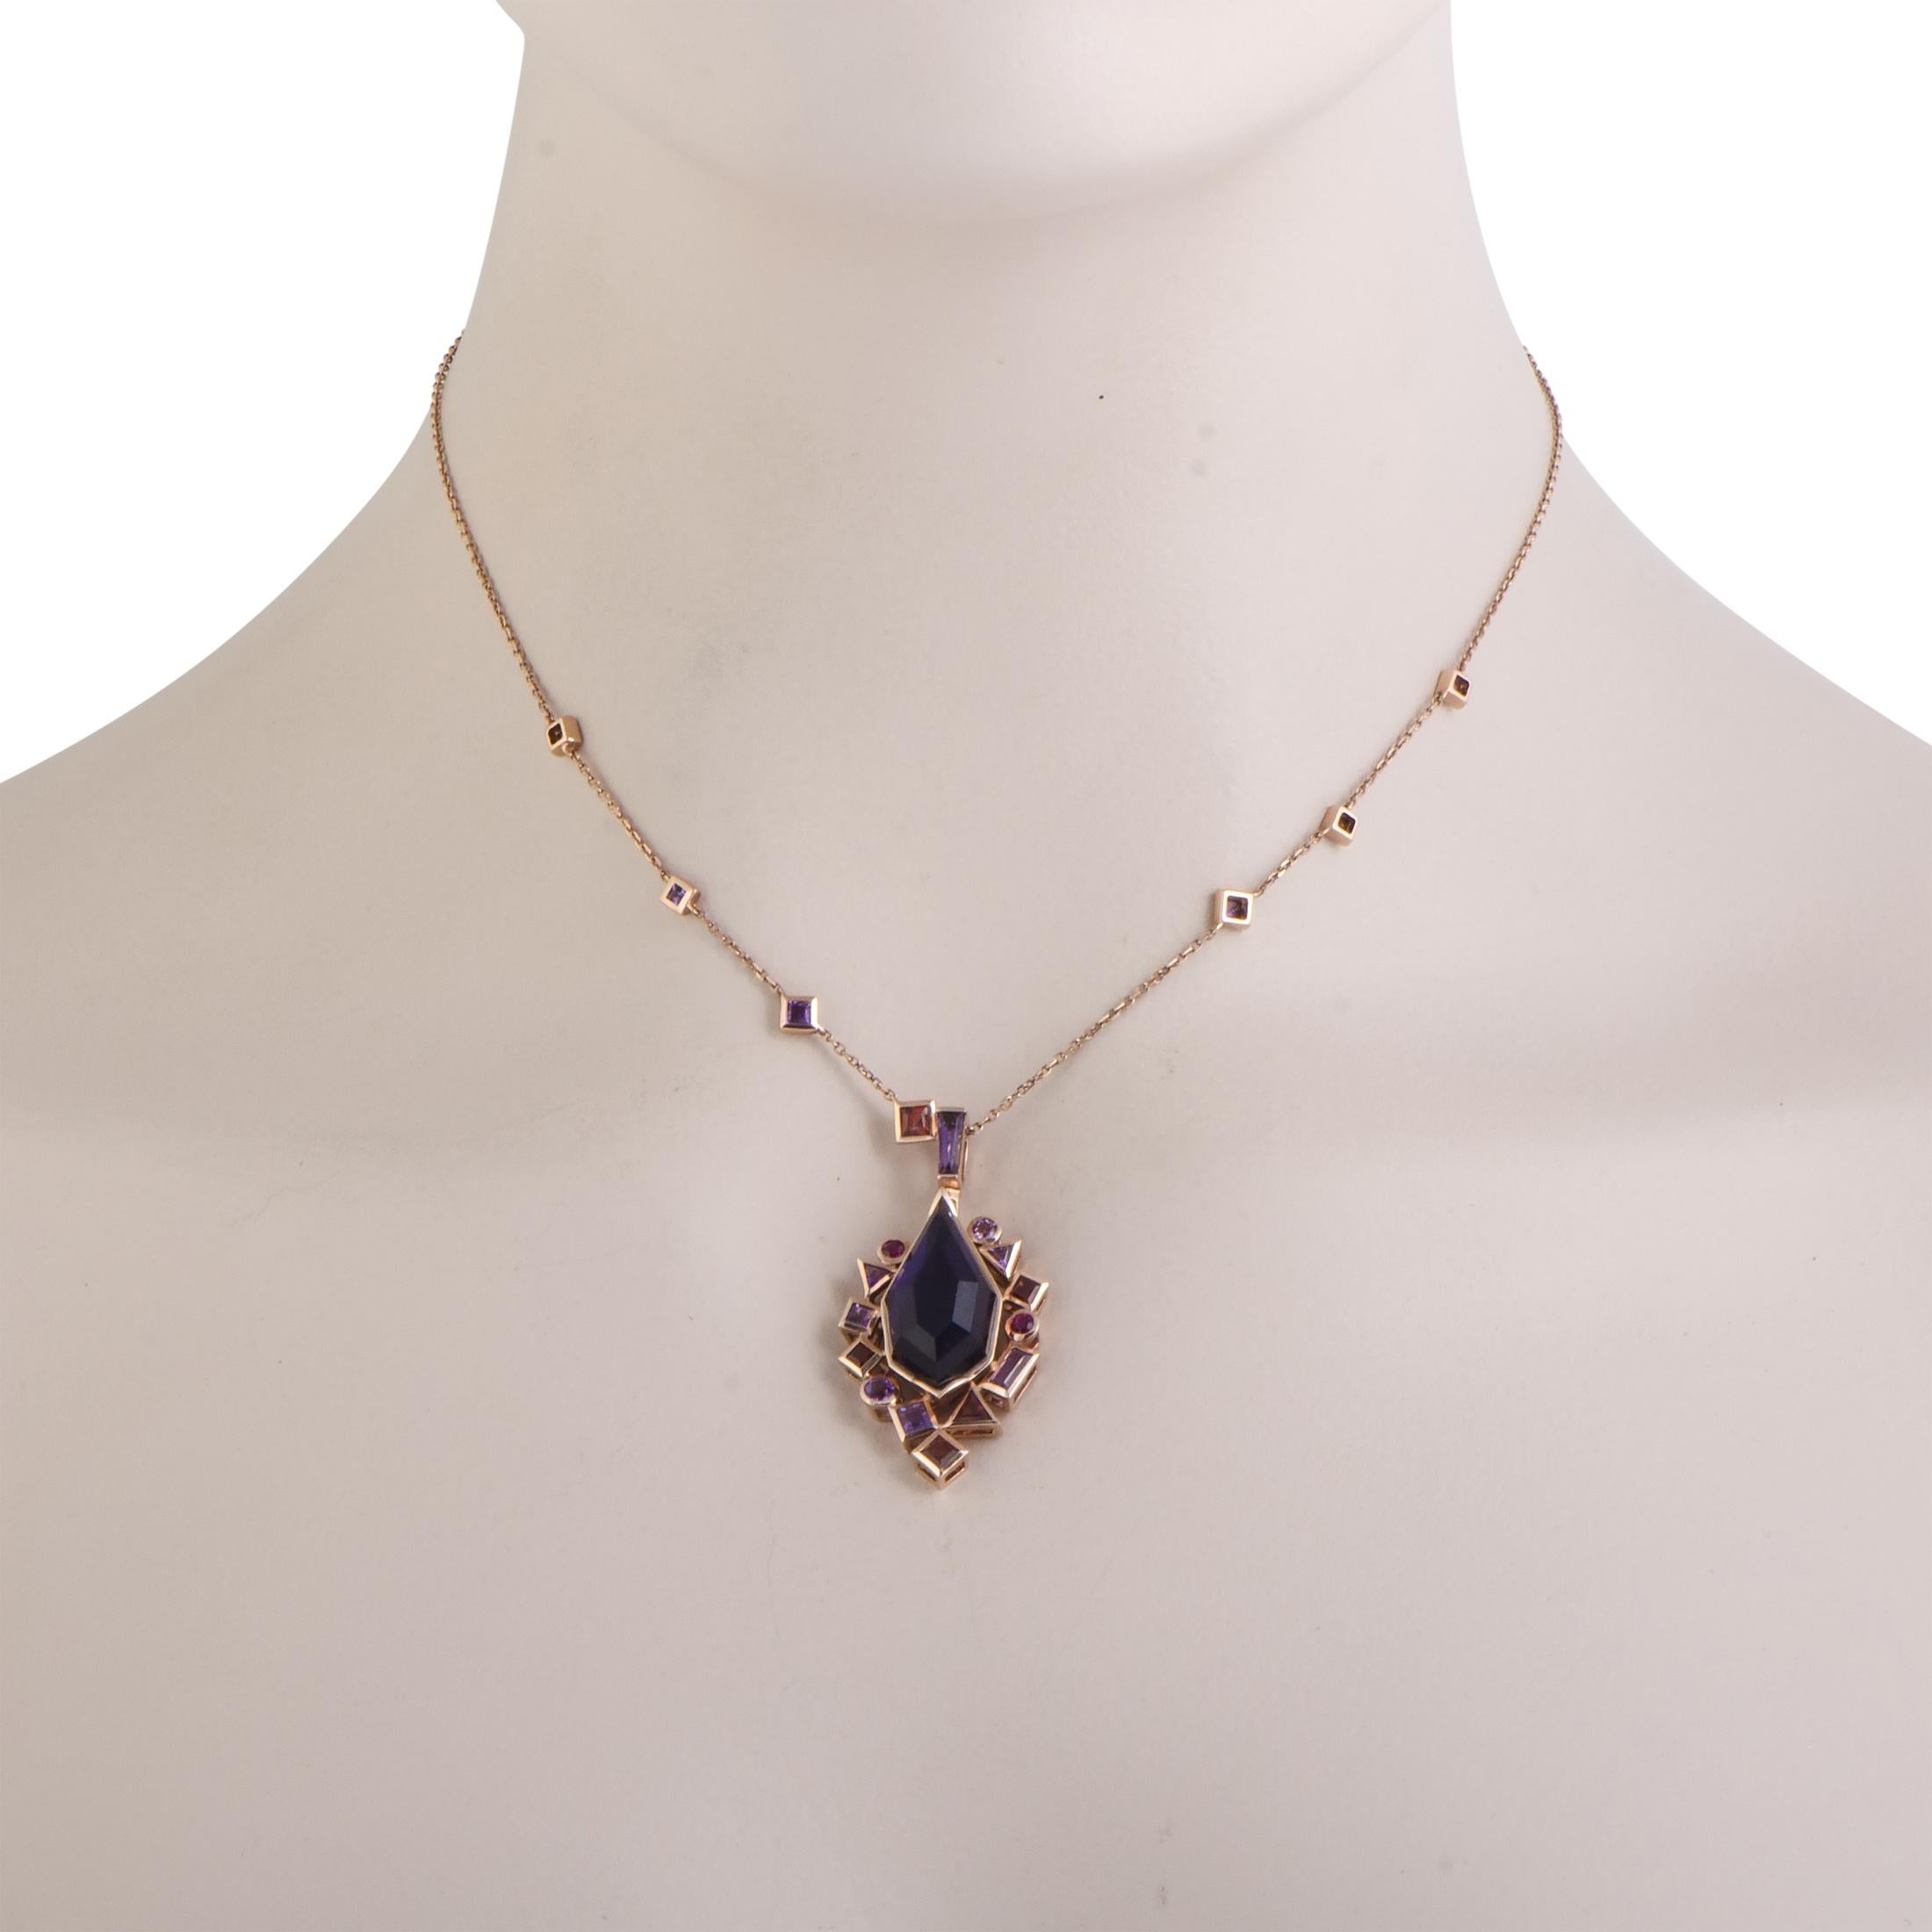 This gorgeous “Gold Struck” necklace will accentuate your look in a fascinatingly attractive manner thanks to the wonderfully offbeat design and fashionable gemstone décor. The necklace is presented by Stephen Webster, and it is made of alluring 18K